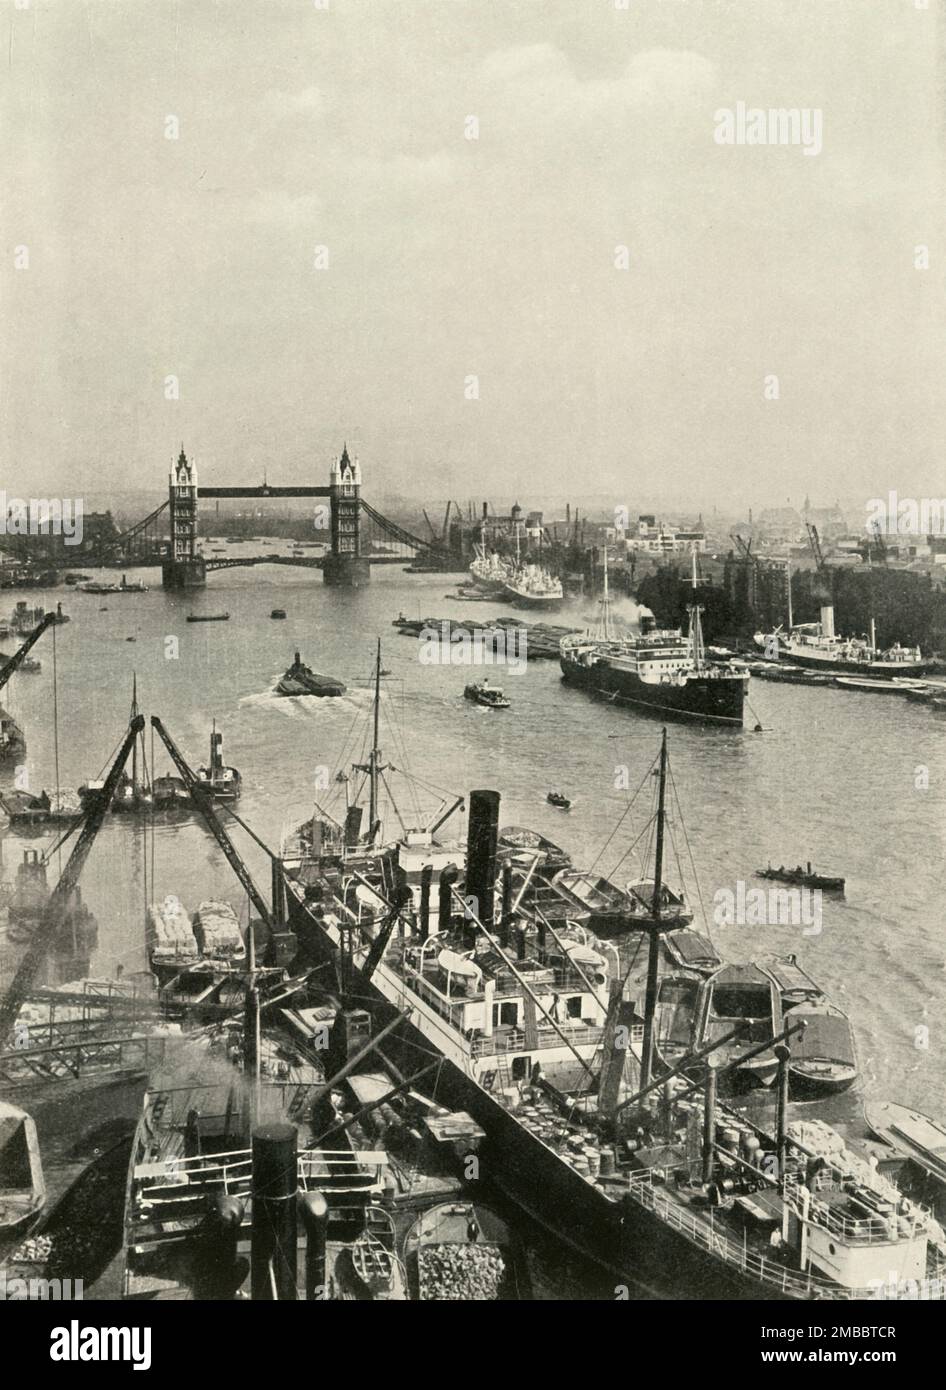 &quot;But The Prospect in the Neighbouring Pool - The More It Changes, The More It Is The Same&quot;', 1937. Cargo ships in the Pool of London, River Thames. In the distance is Tower Bridge. From &quot;The Said Noble River&quot;, by Alan Bell. [The Port of London Authority, London, 1937] Stock Photo